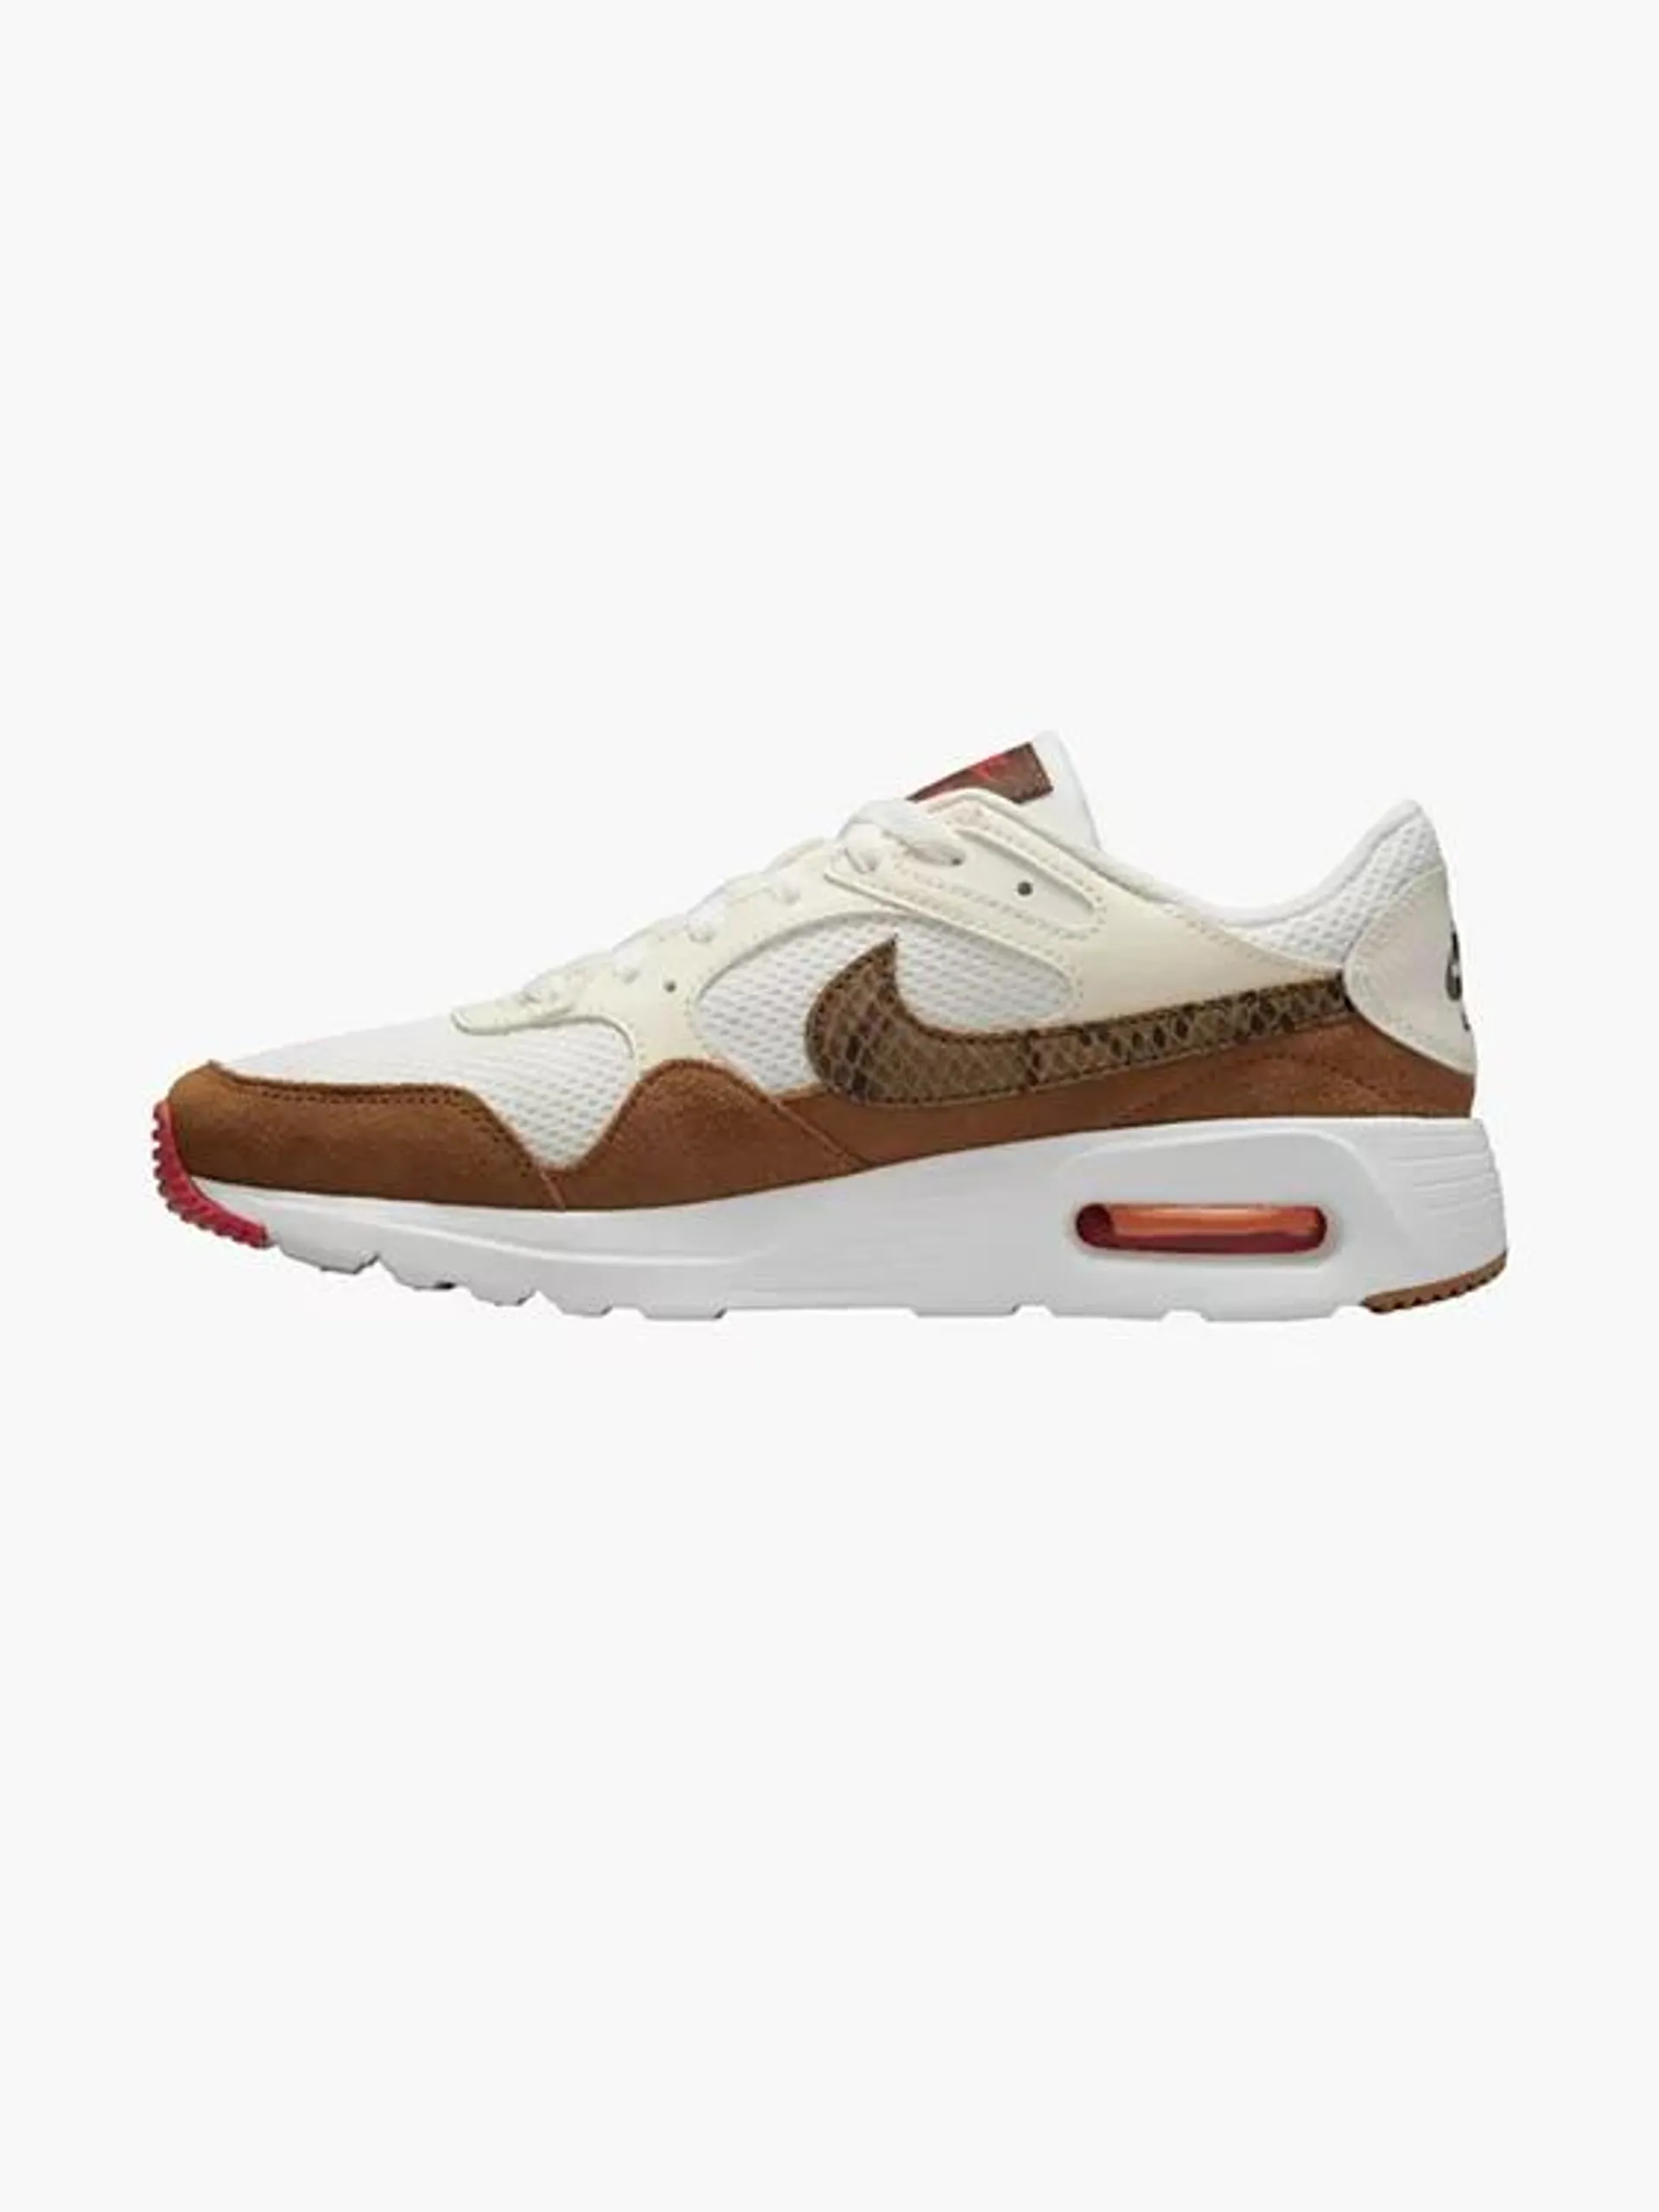 Nike Ivory/ Red Air Max Sc Lace-up Trainer